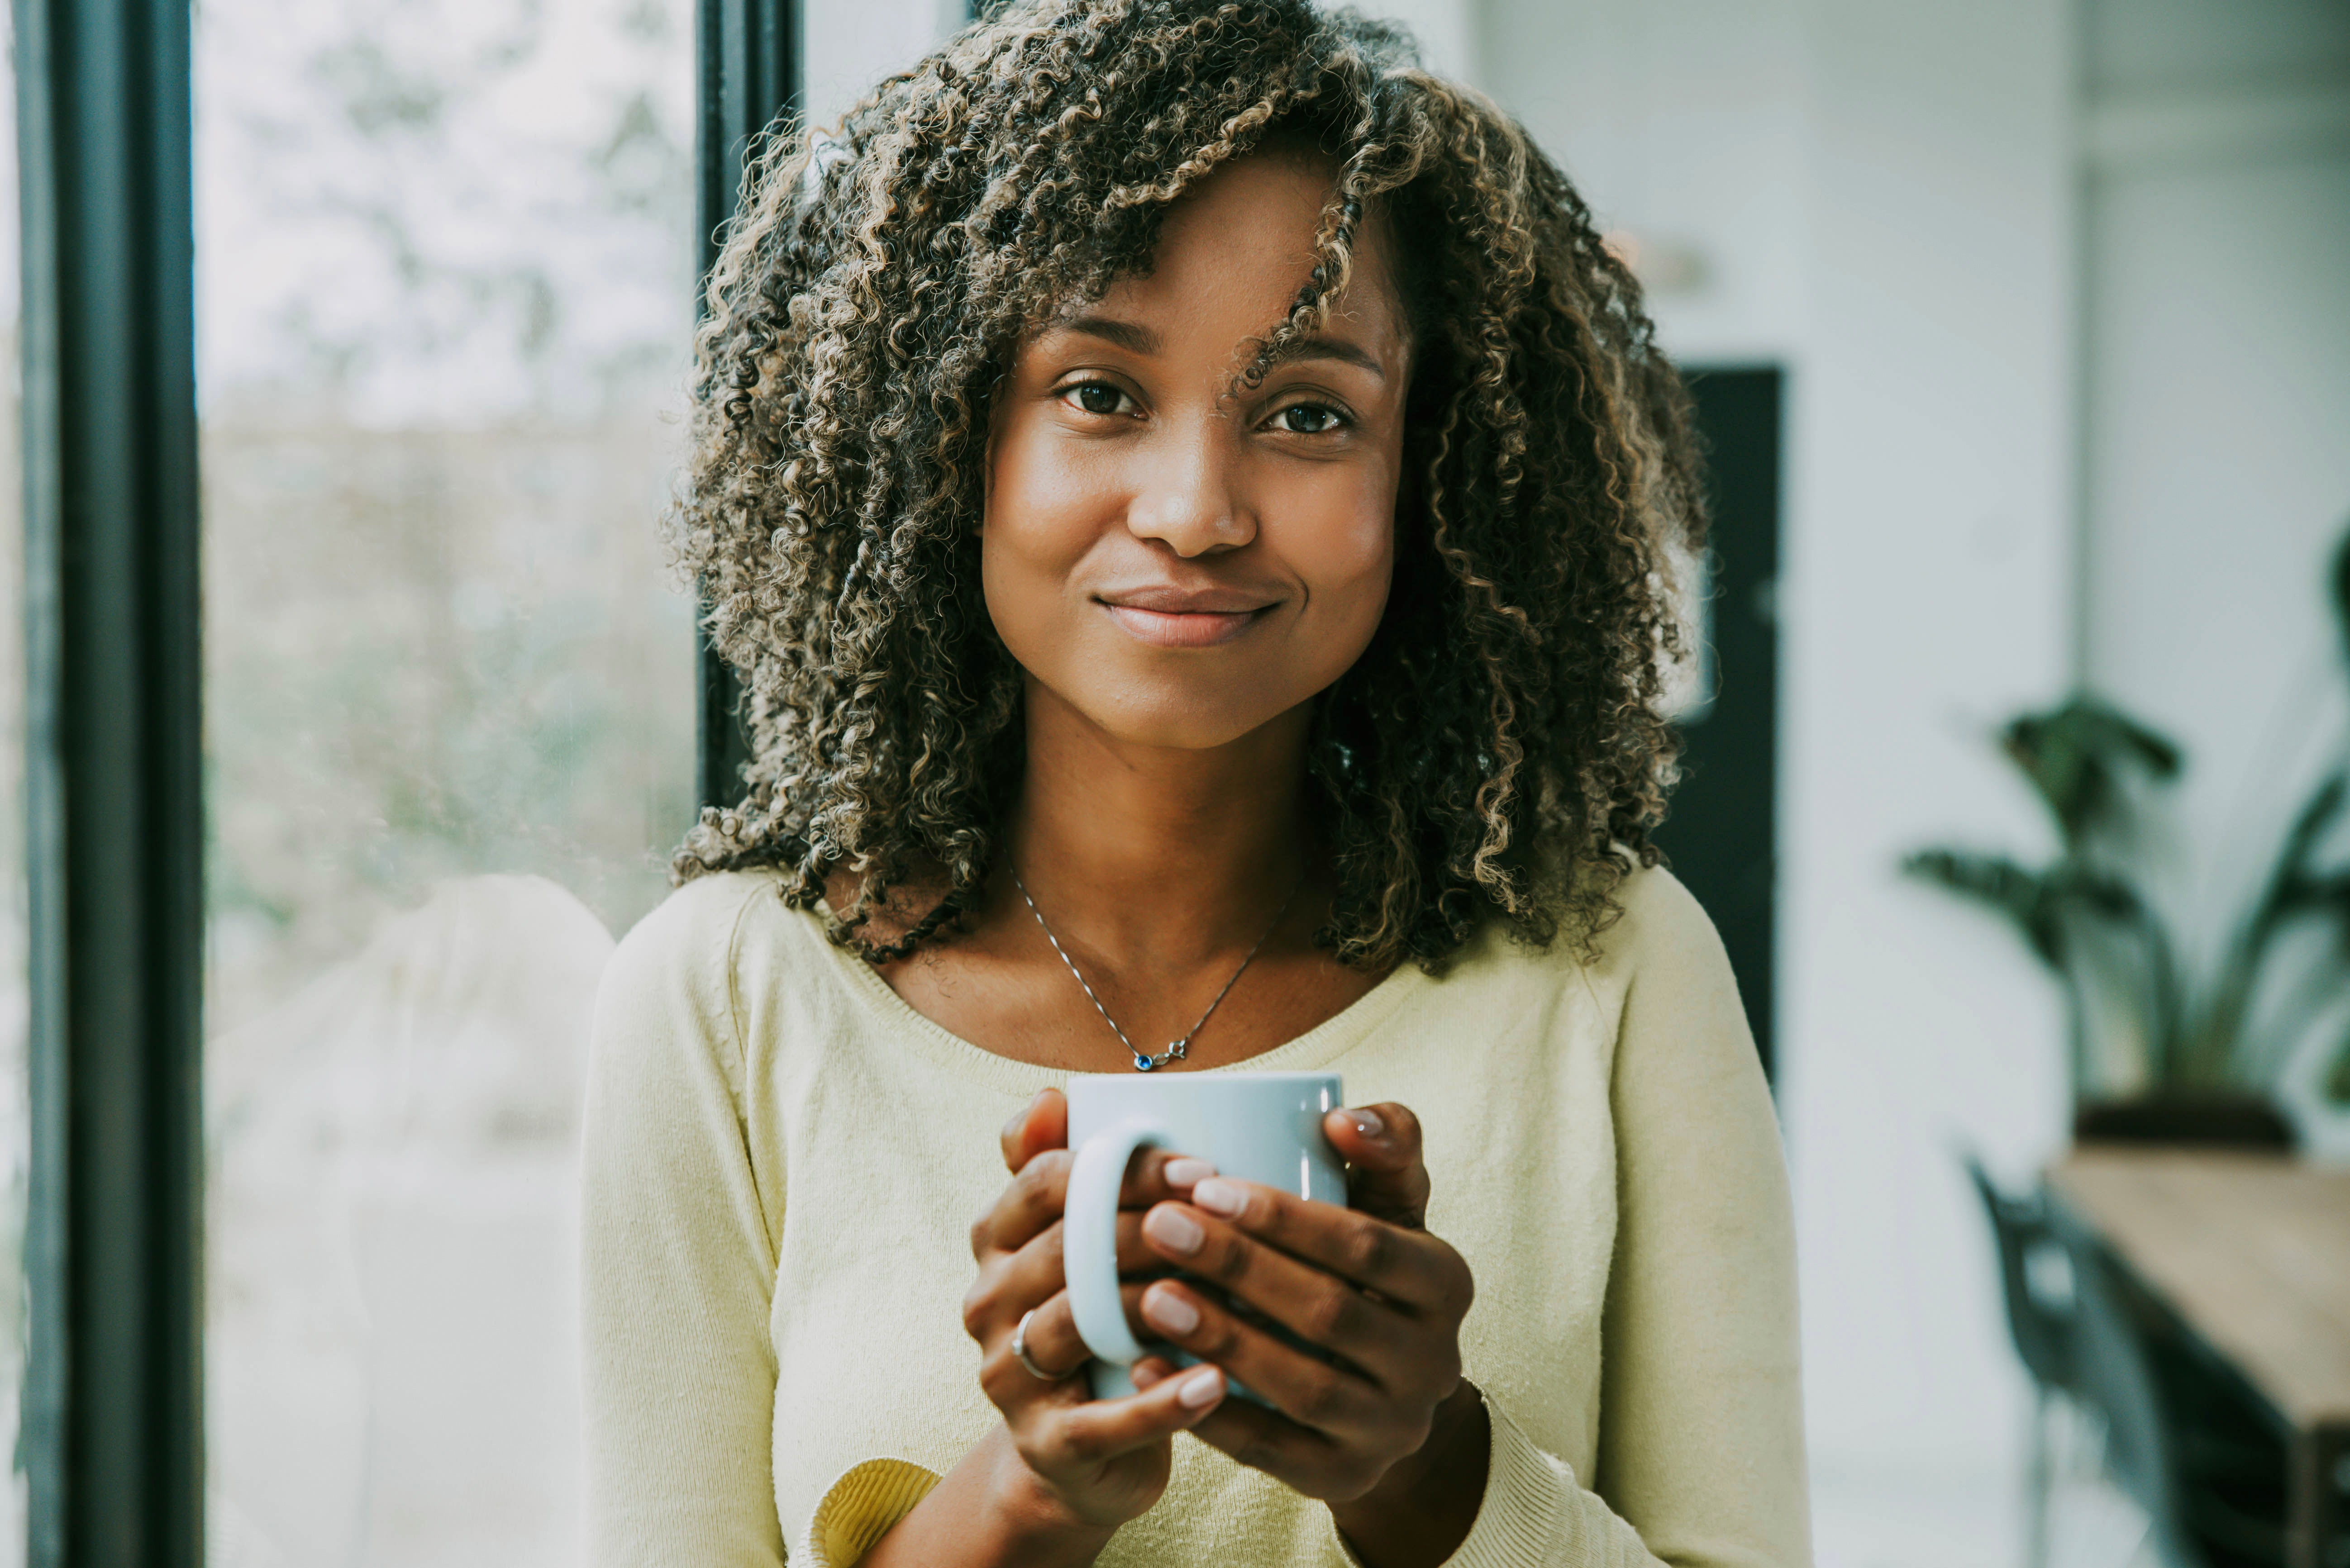 files/portrait-of-young-black-woman-holding-cup-of-tea-l-2022-12-17-03-38-36-utc.jpg